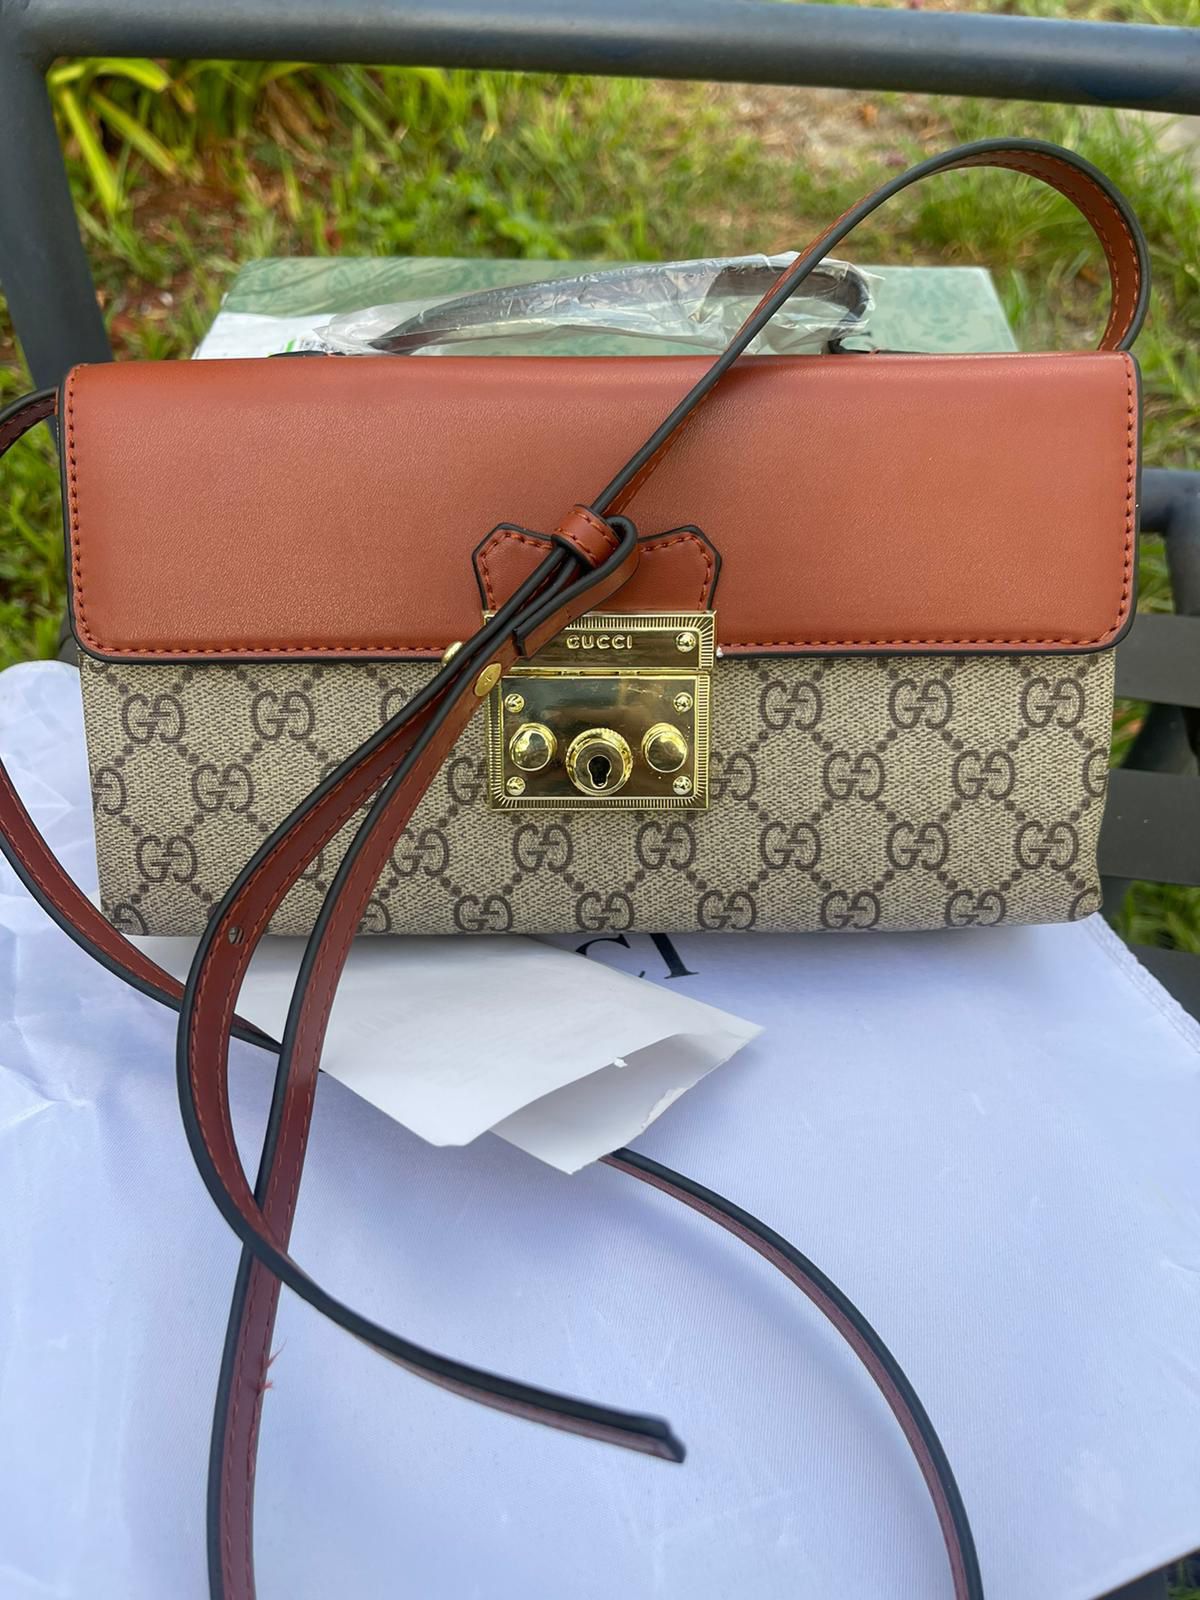 Monogrammed Leather Gucci Bag